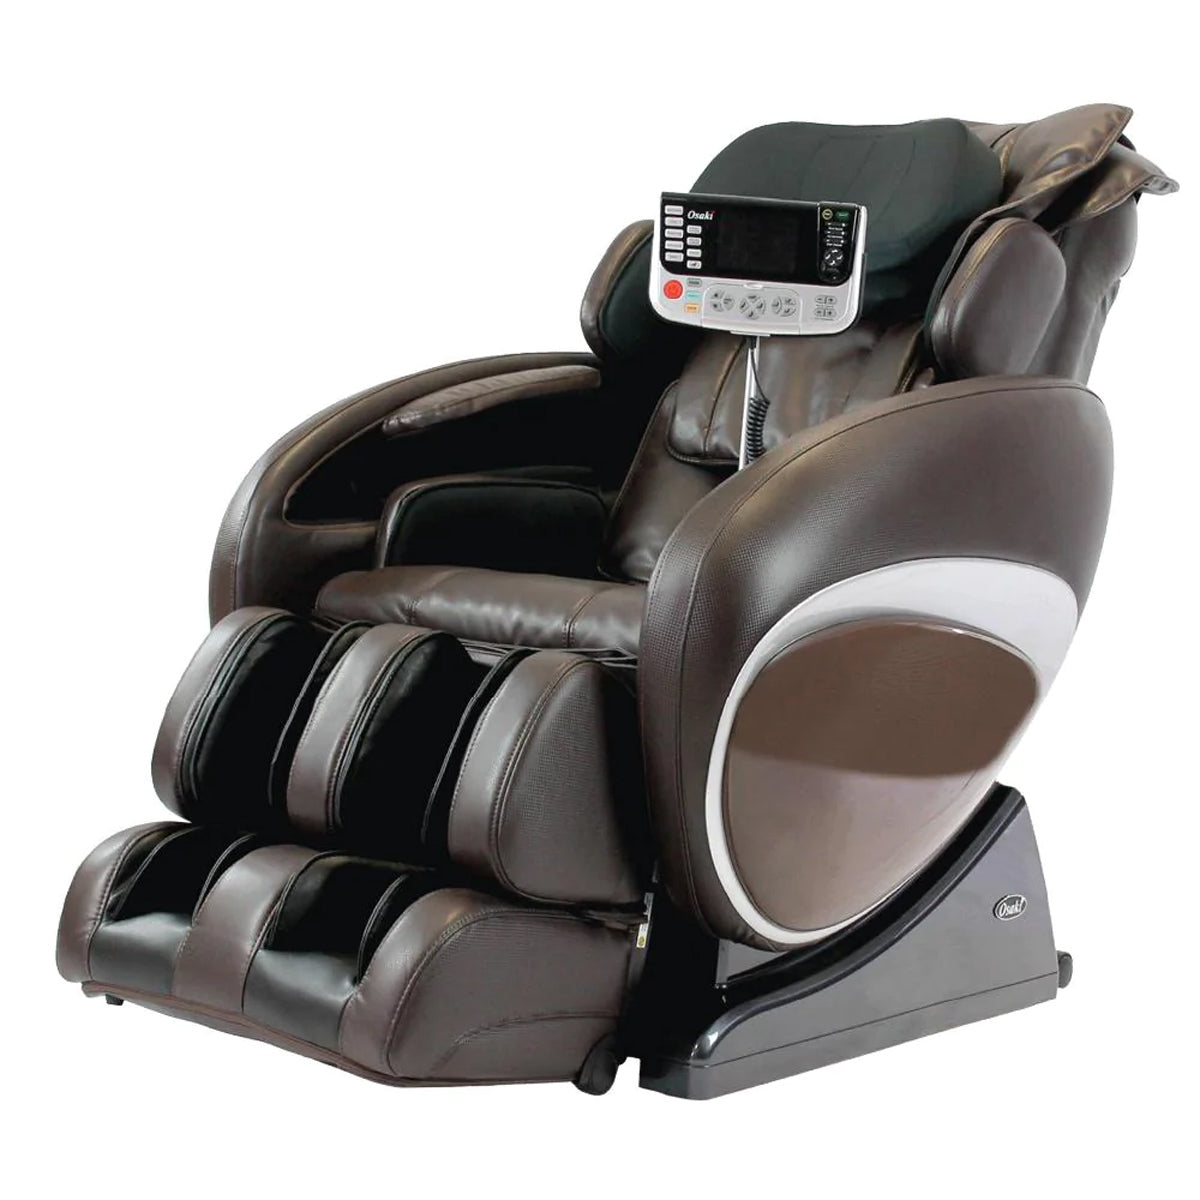 Massage Chairs Priced $2000 - $4999